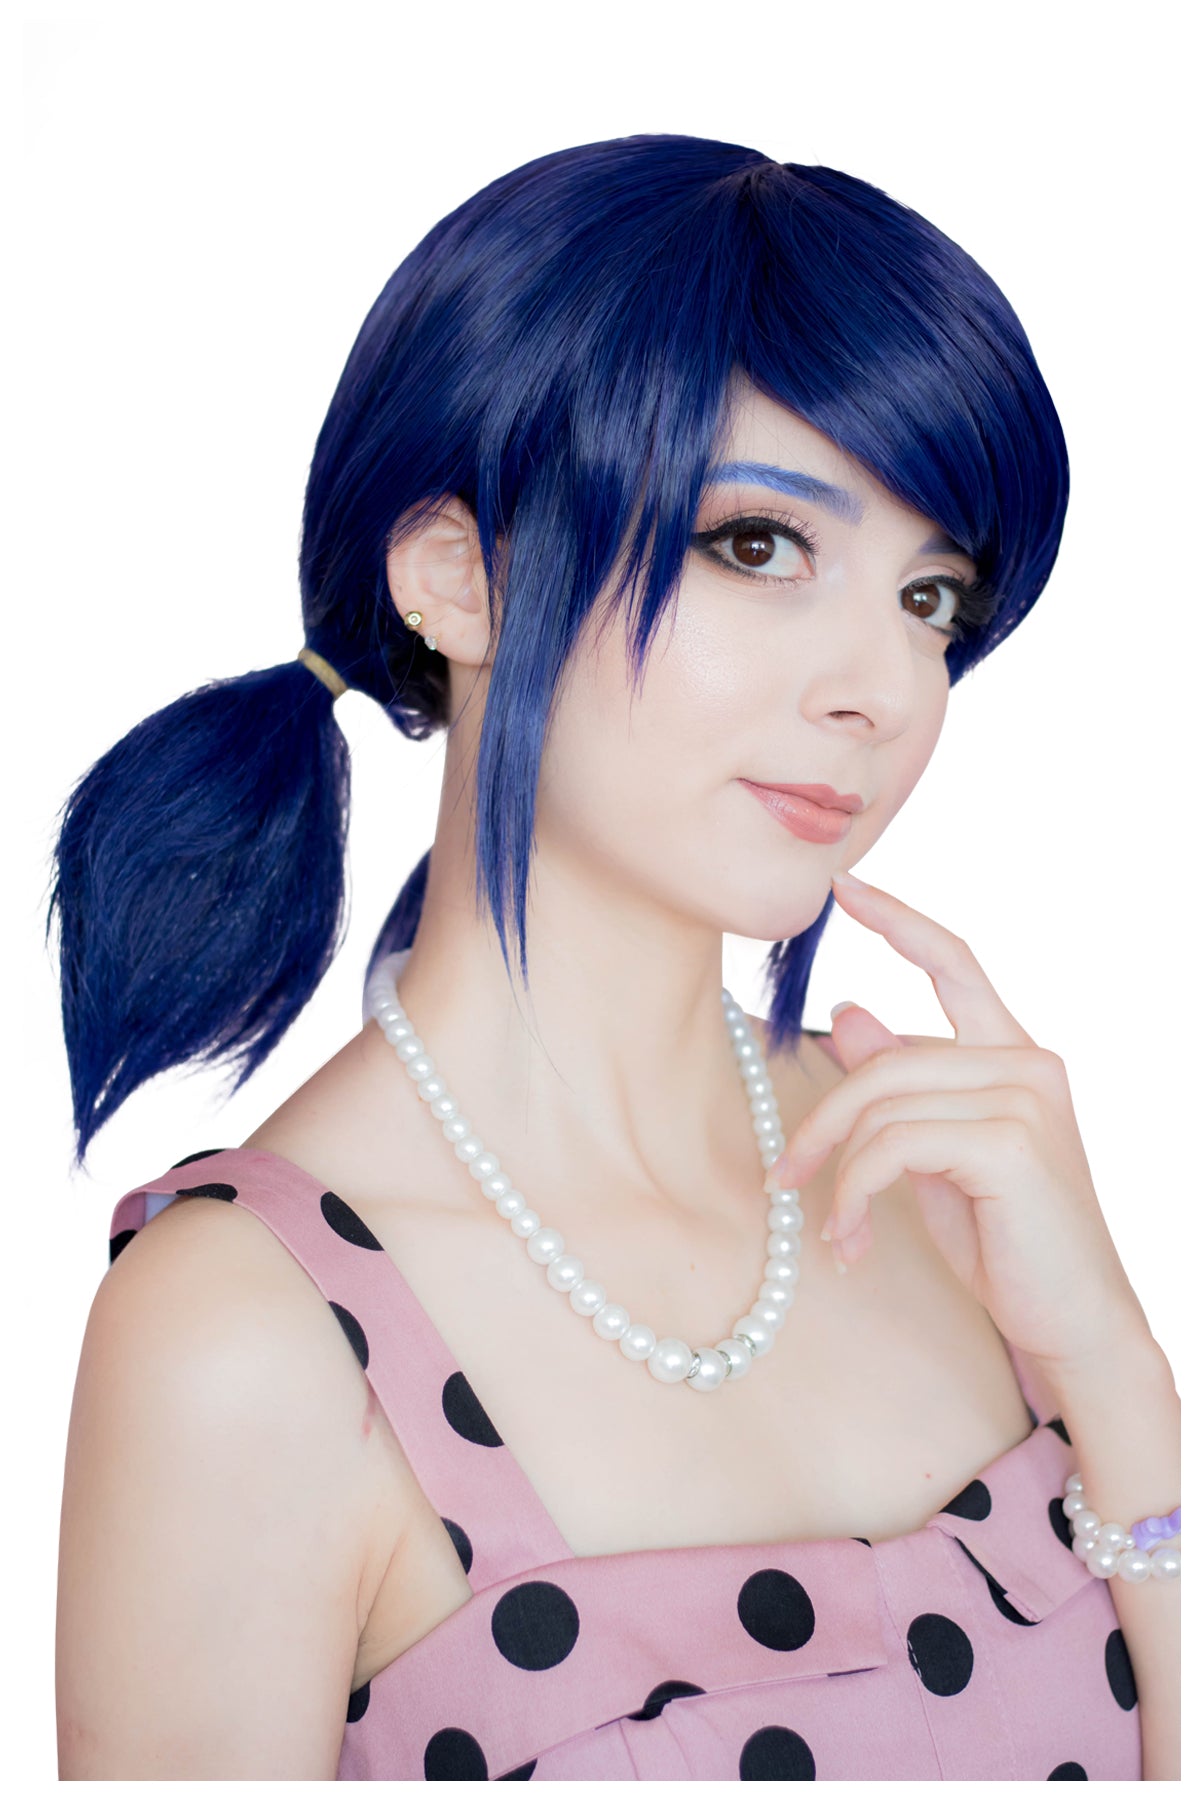 Buy Anime Cosplay Wig For Girls Blue Hair With Red Rope Online